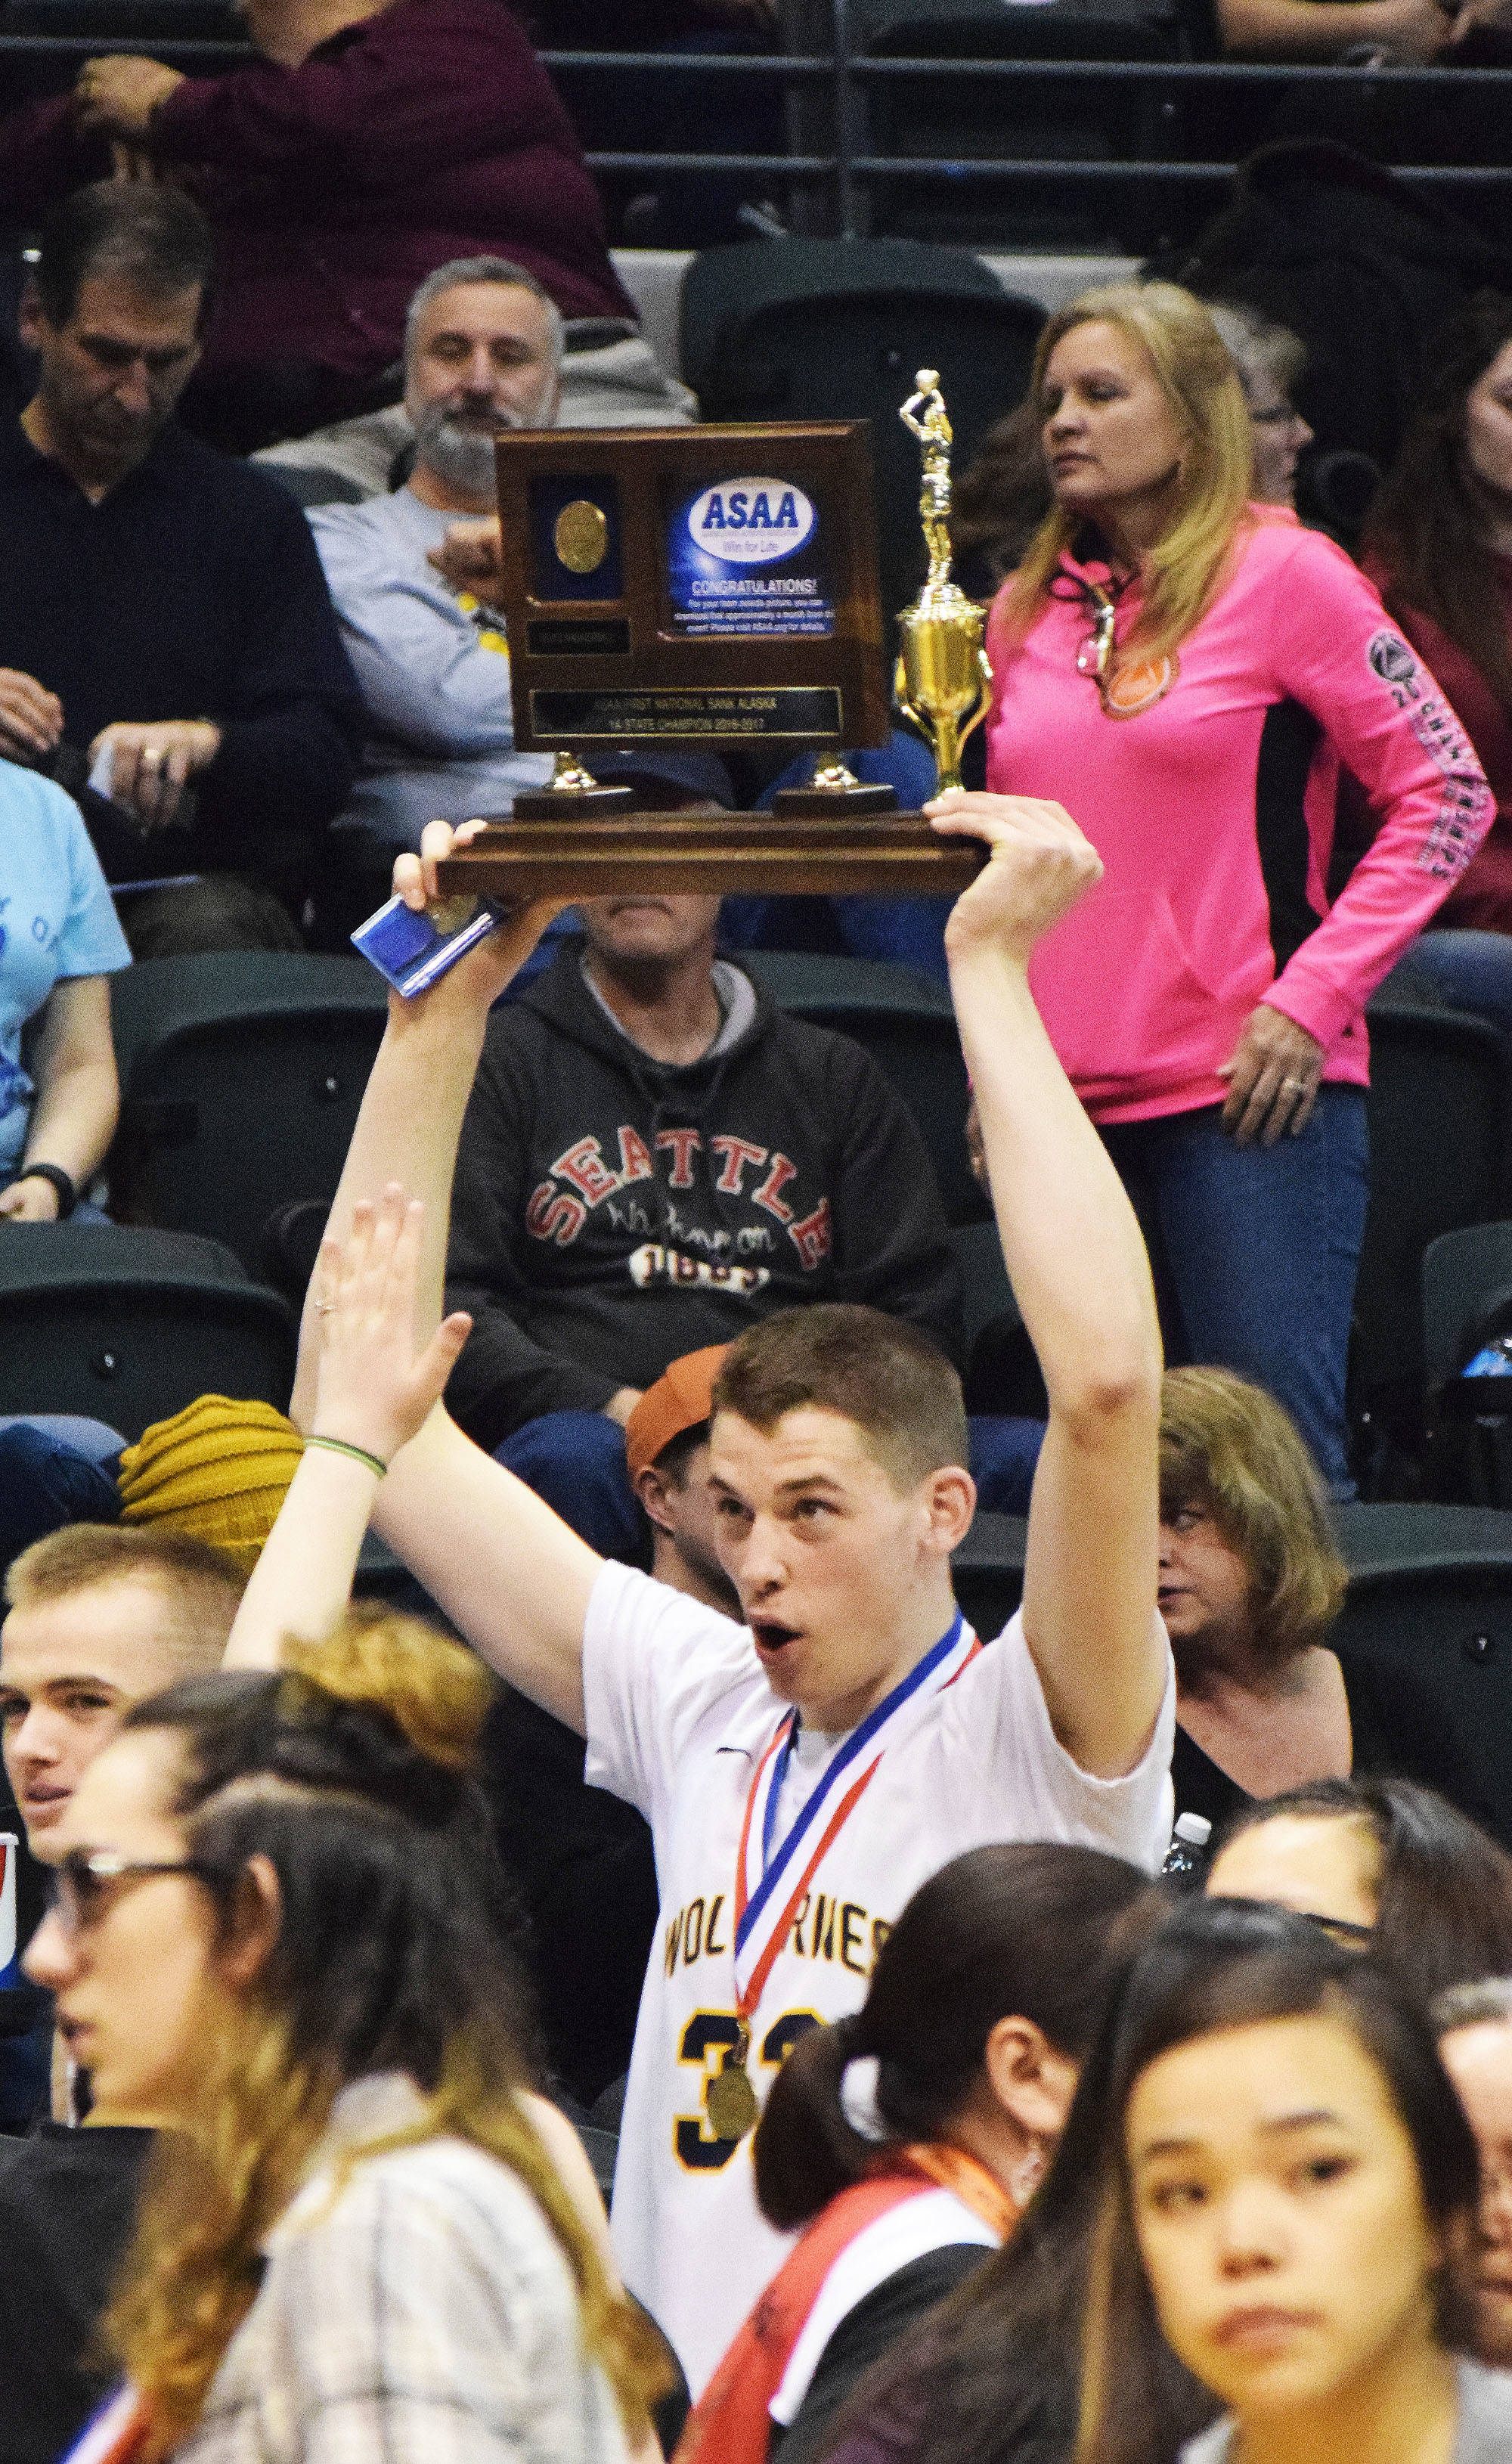 Ninilchik senior Austin White holds the championship trophy high above his head after the Class 1A state championship game Saturday, March 18, 2017, at the Alaska Airlines Center in Anchorage. (Photo by Joey Klecka/Peninsula Clarion)